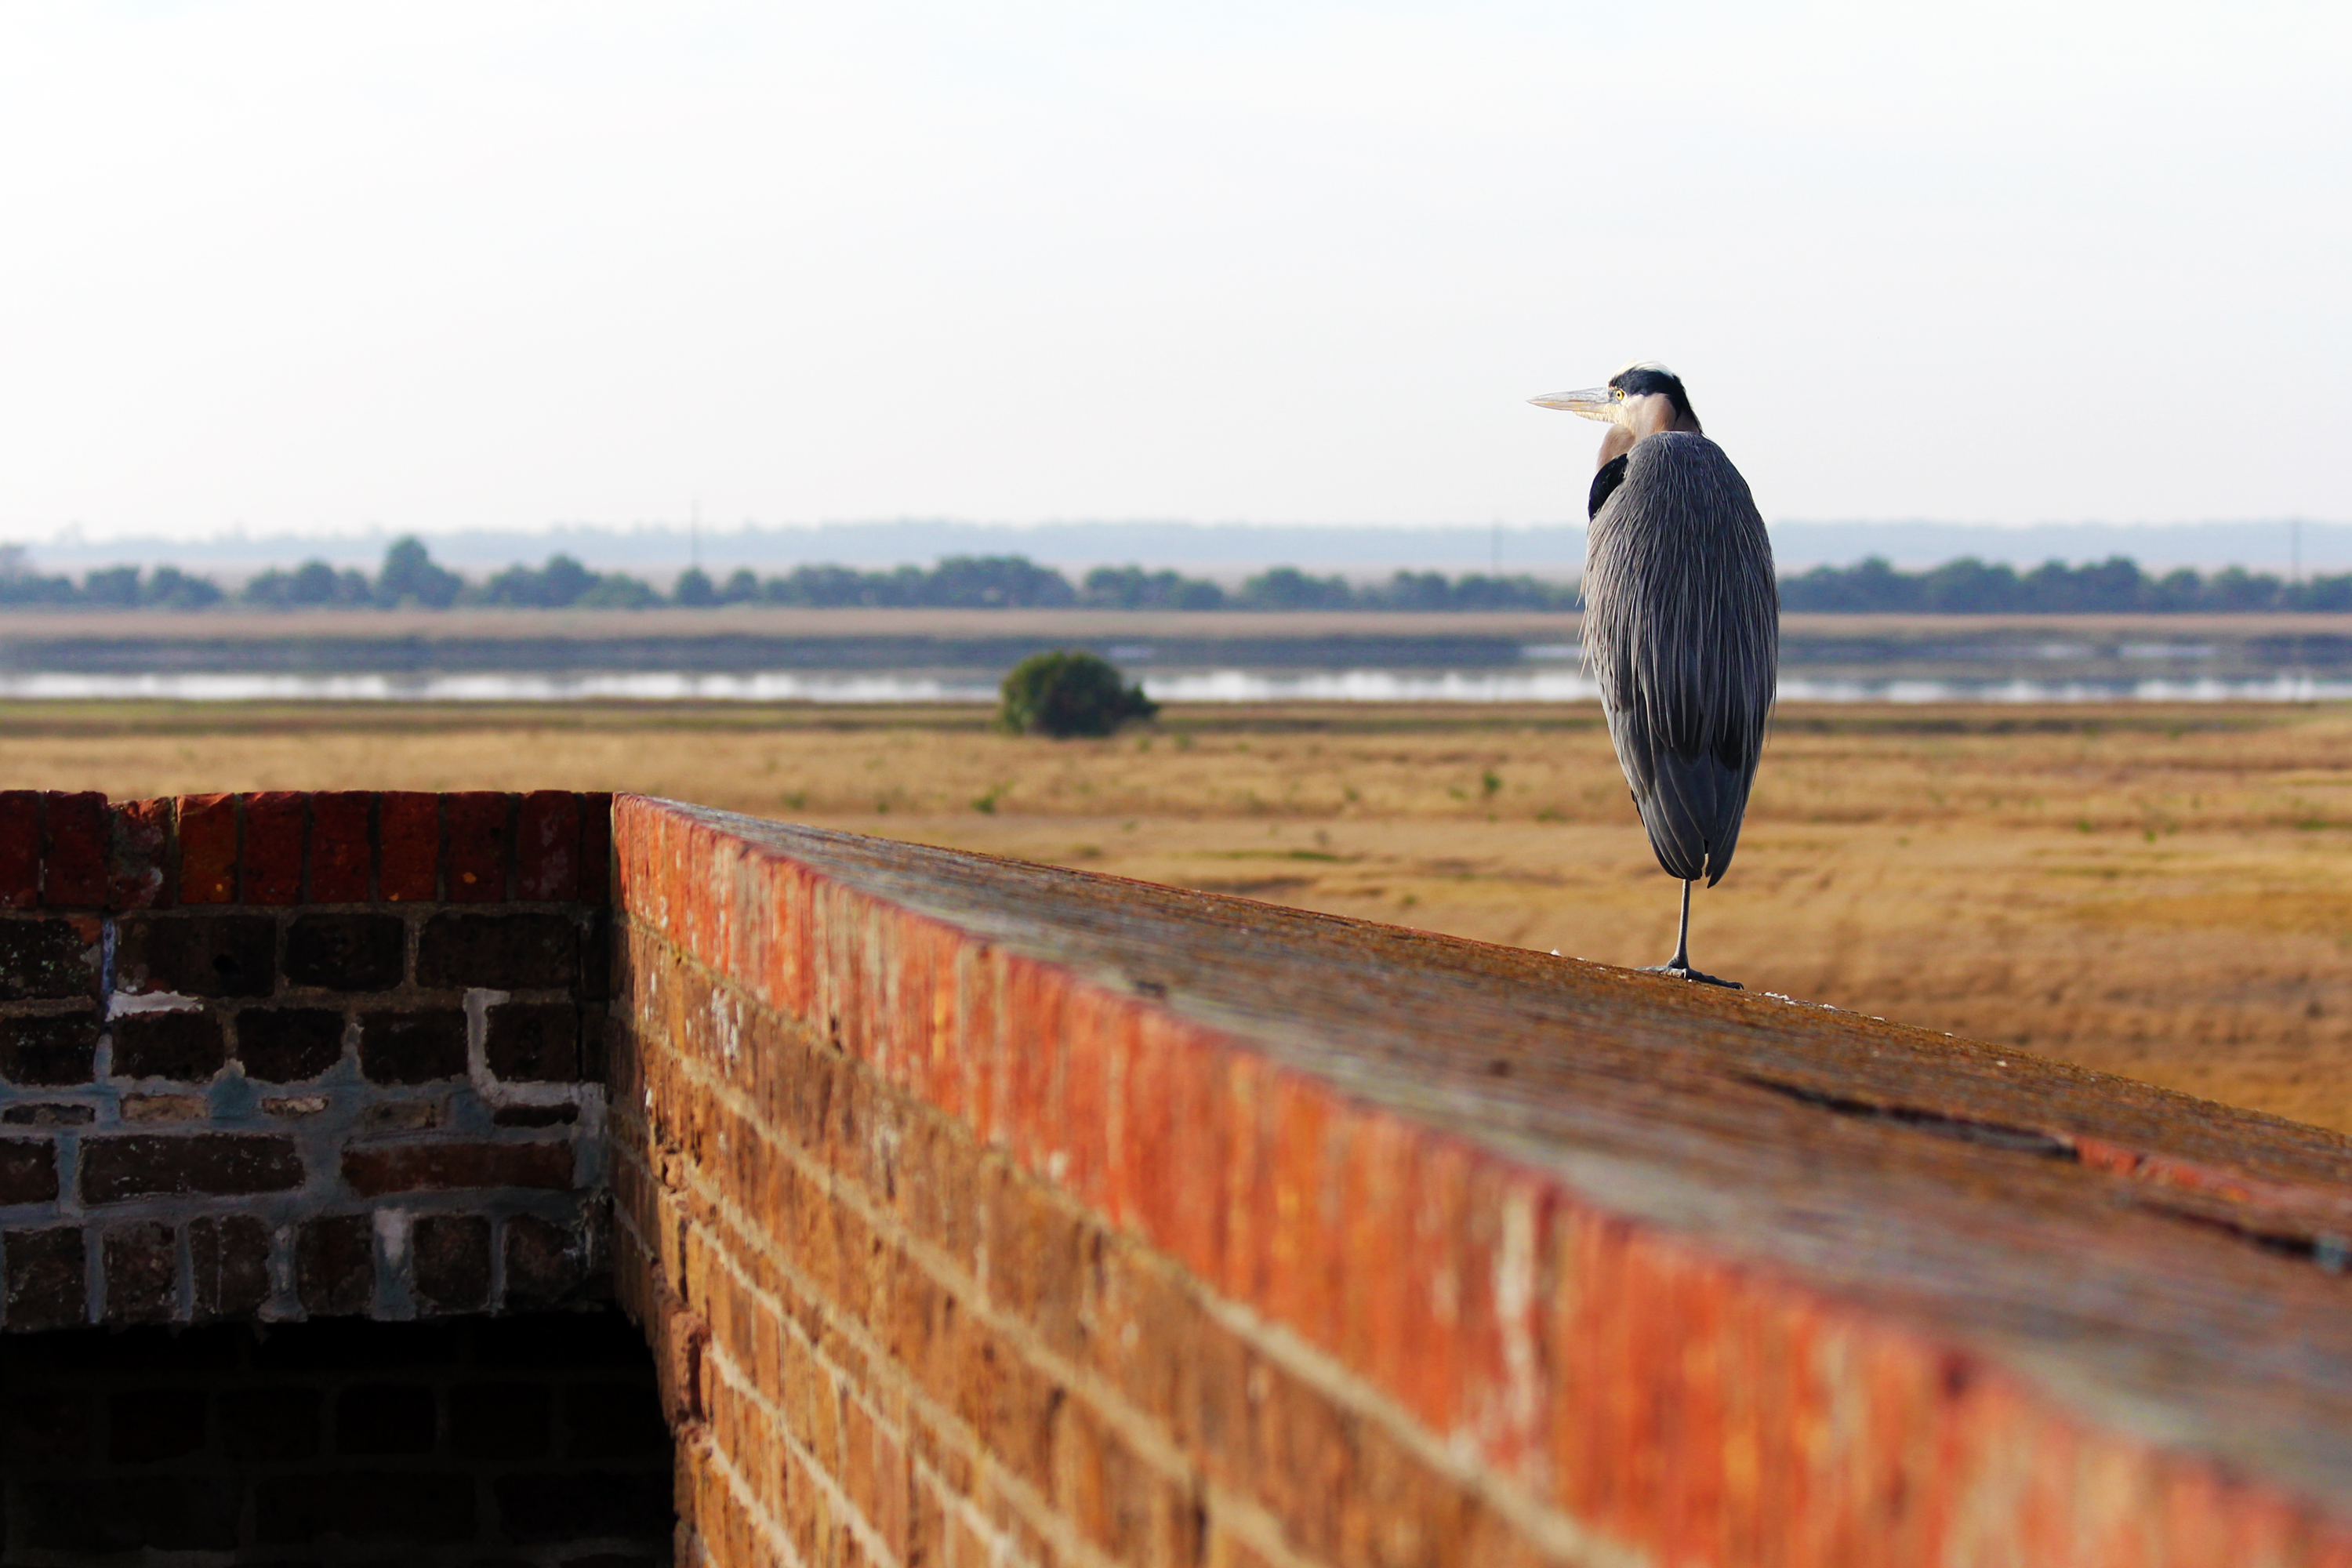 A great blue heron stands watch on top of the fort's brick walls.